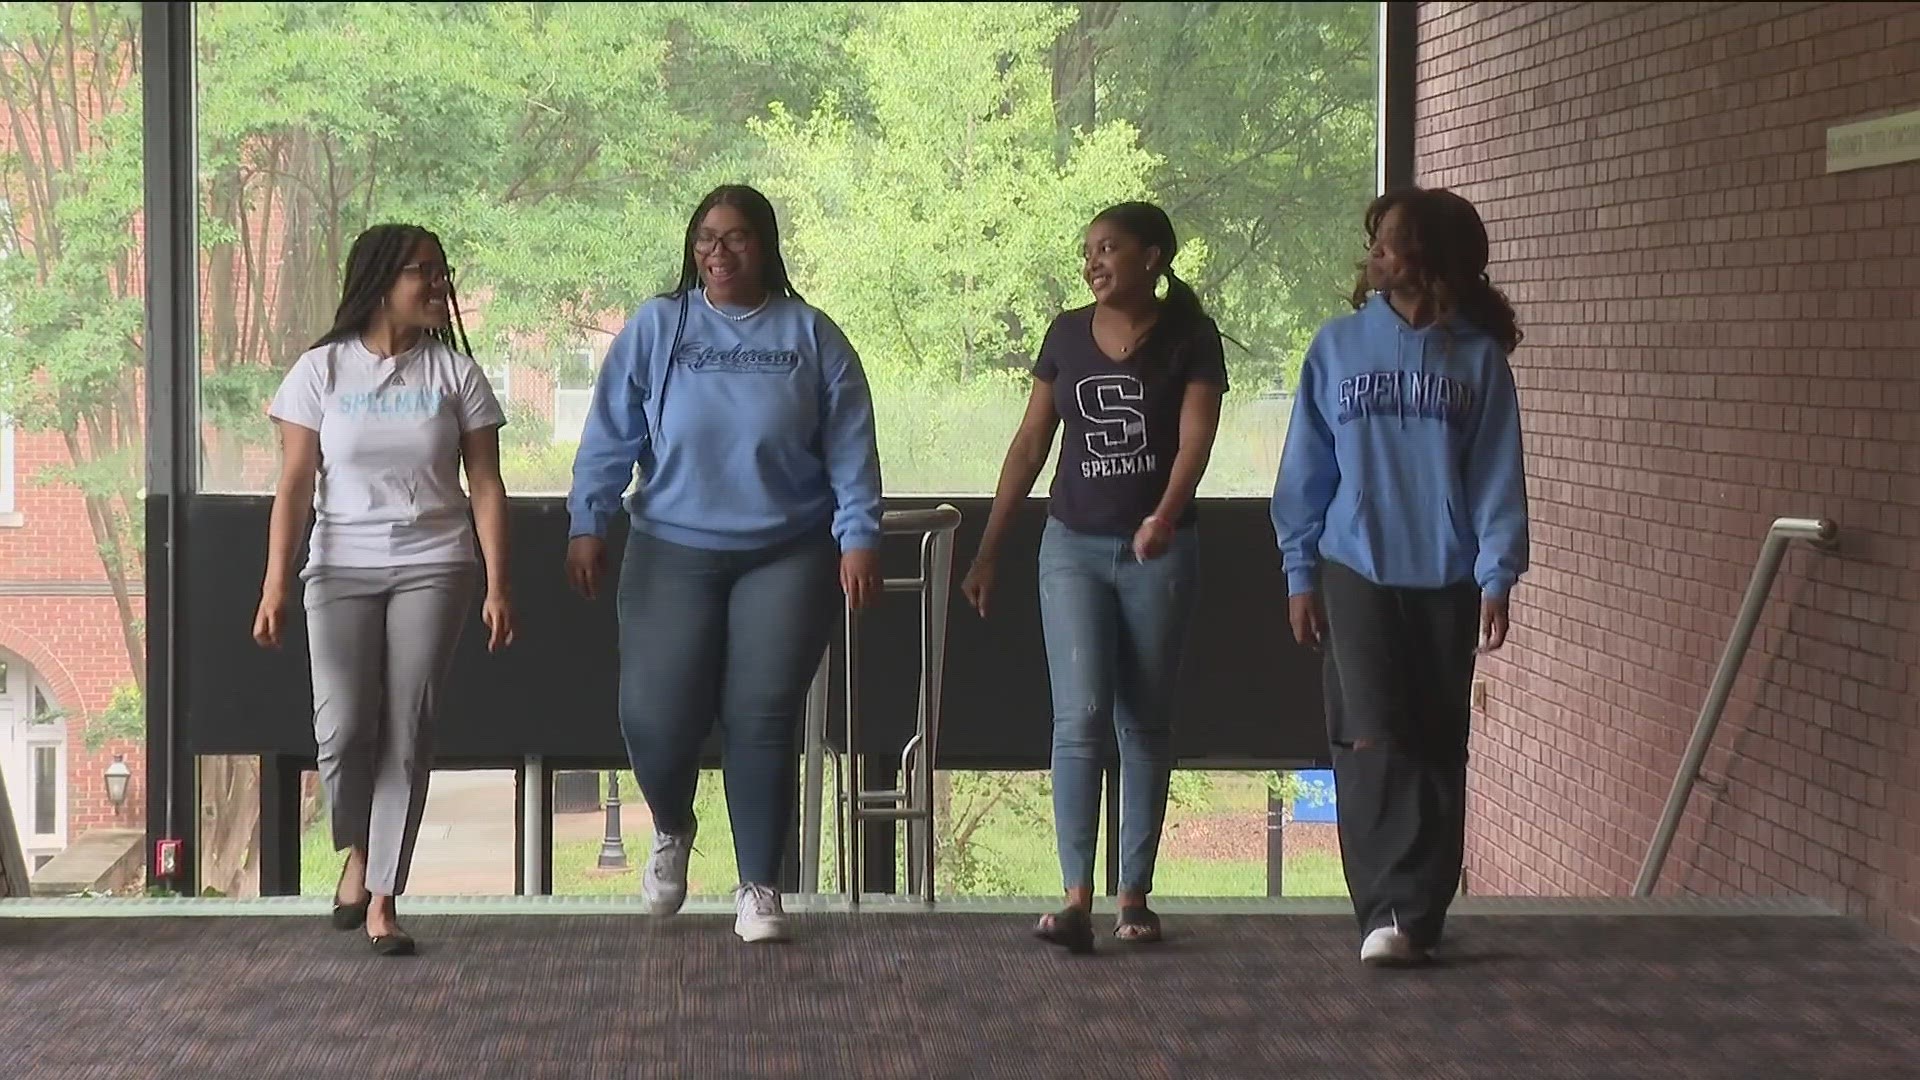 This year four Spelman students: Chandler Nutall, Maia Blasingame, Amaia Calhoun and Sydney DuPree will serve as Valedictorians of the Class of 2023.